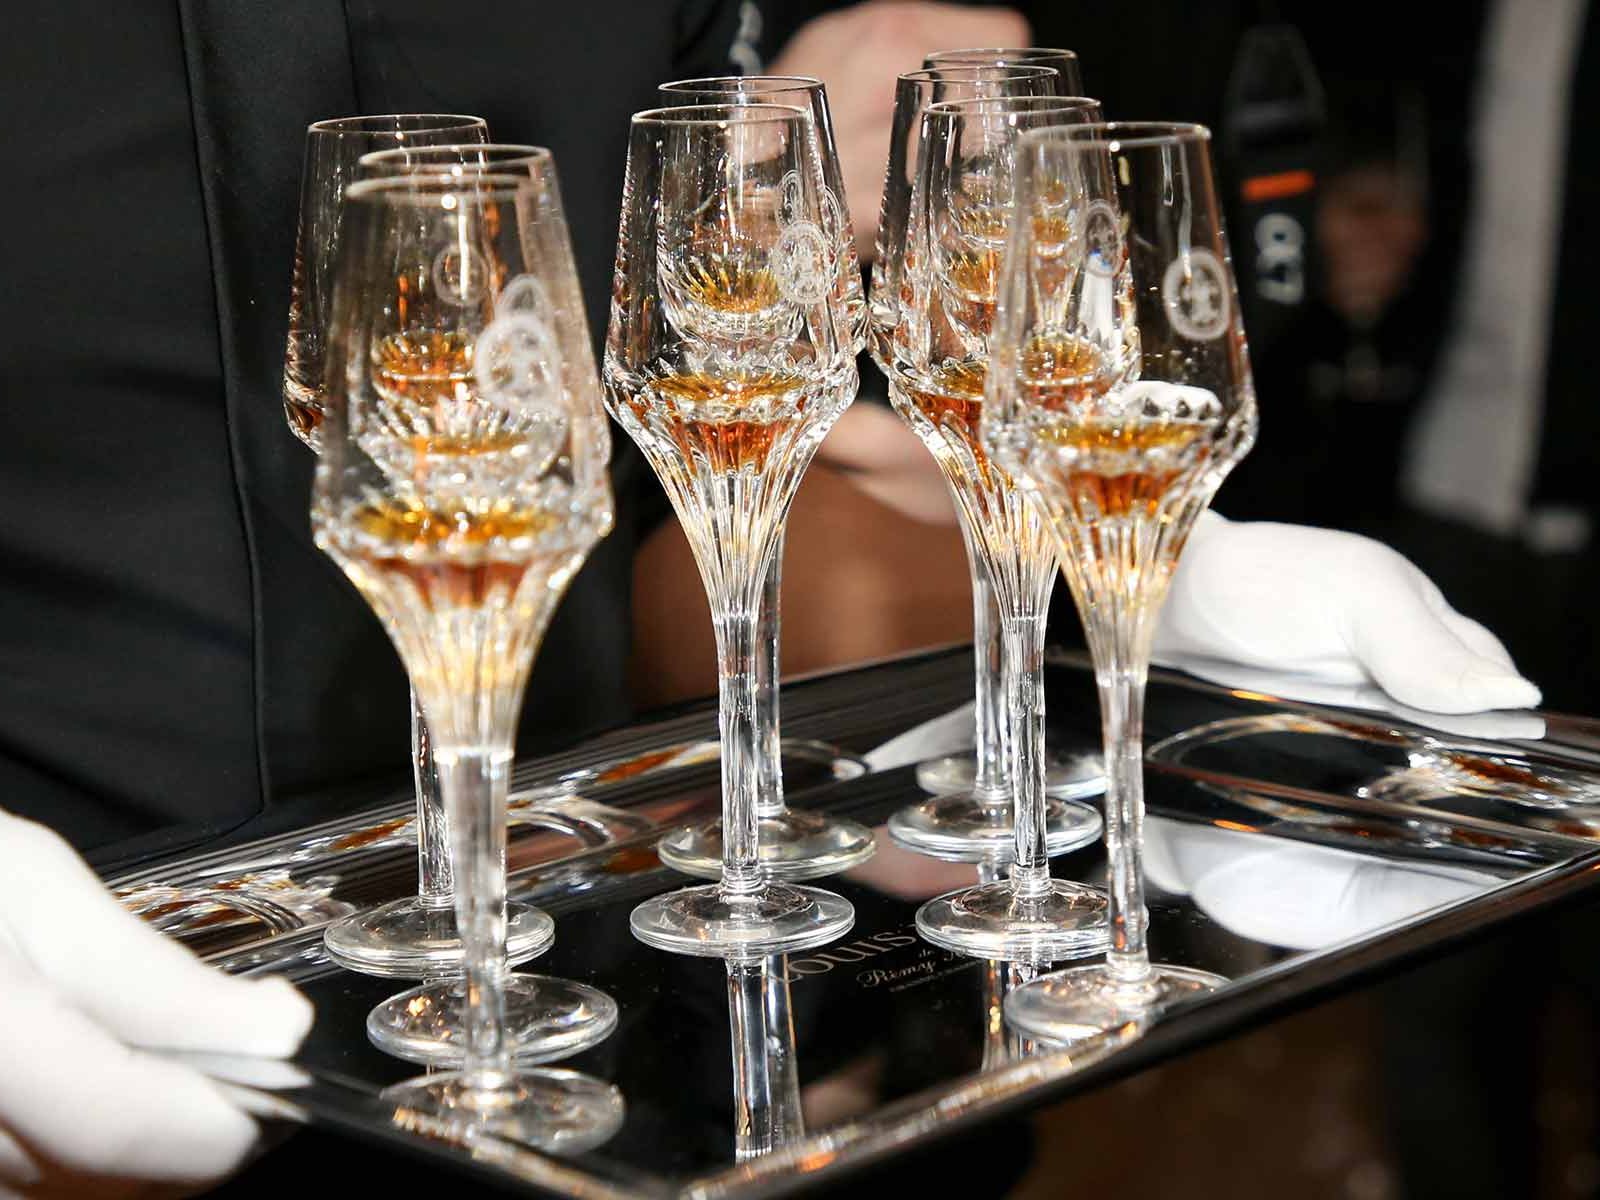 Cognac has always been popular in bars;&nbsp;whether served straight, long or made into an extravagant cocktail.